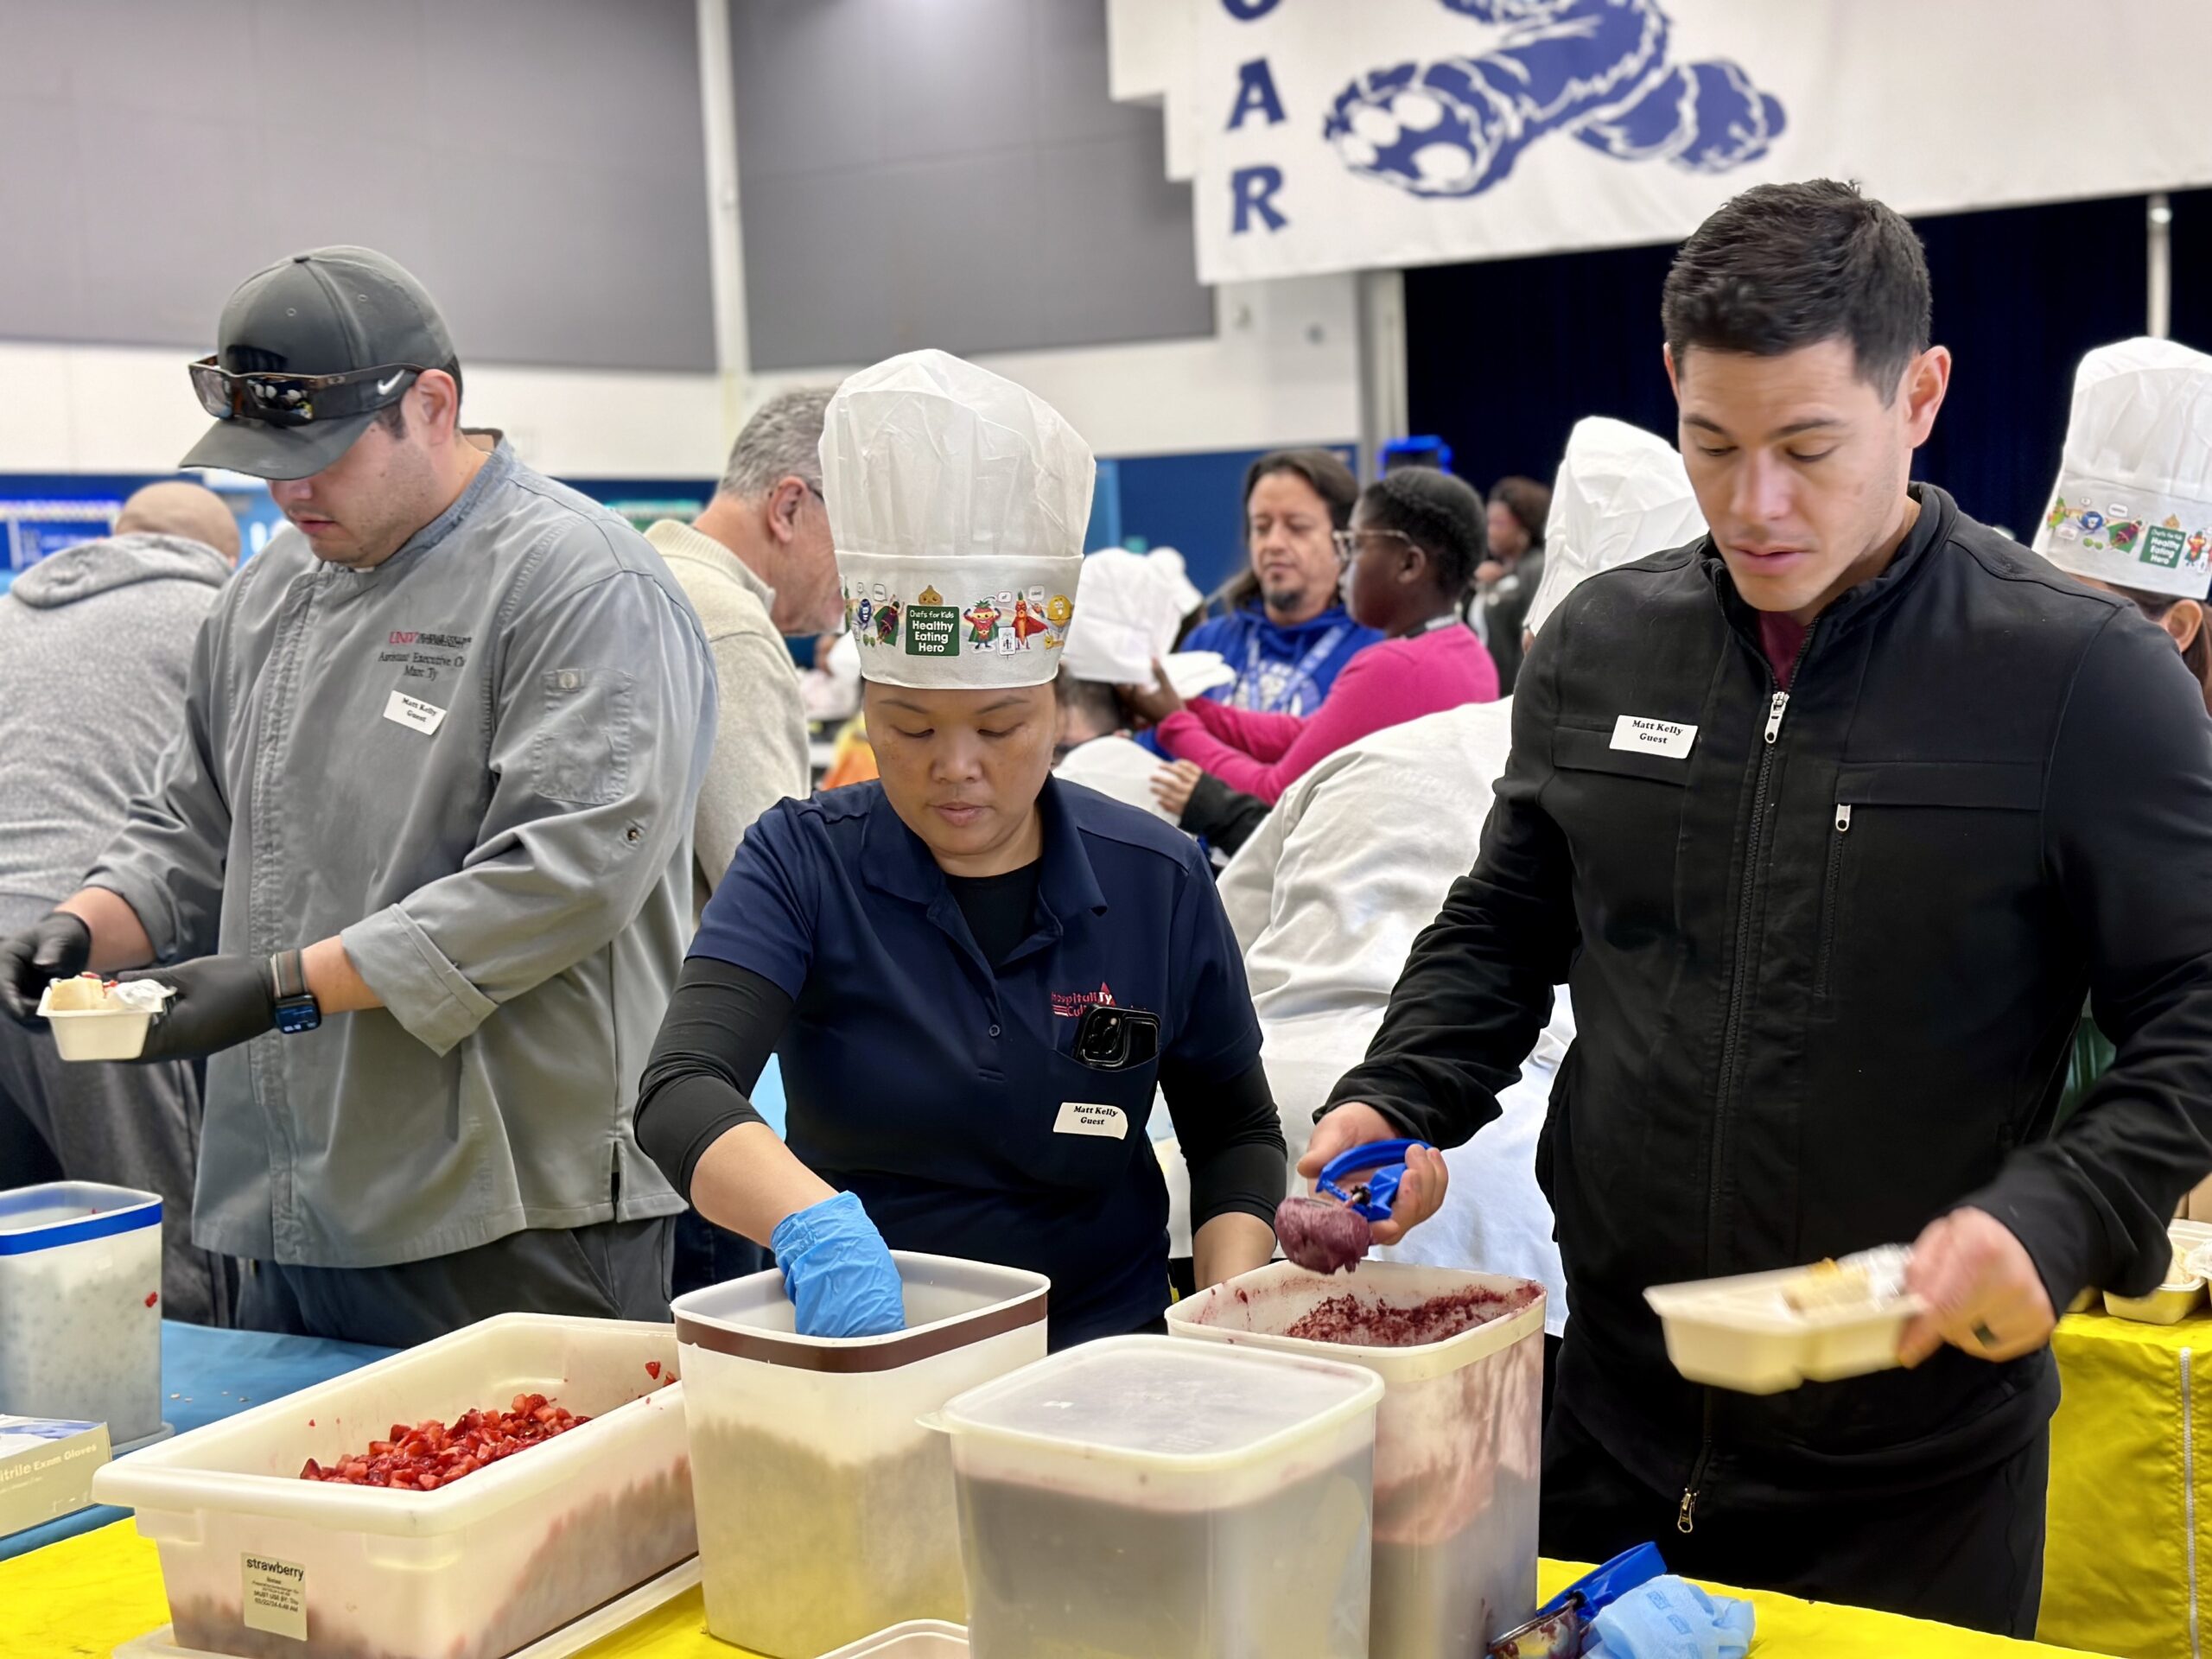 Two men and a female stand behind a table prepping breakfast bowls to be served to kids at an elementary school cafeteria.